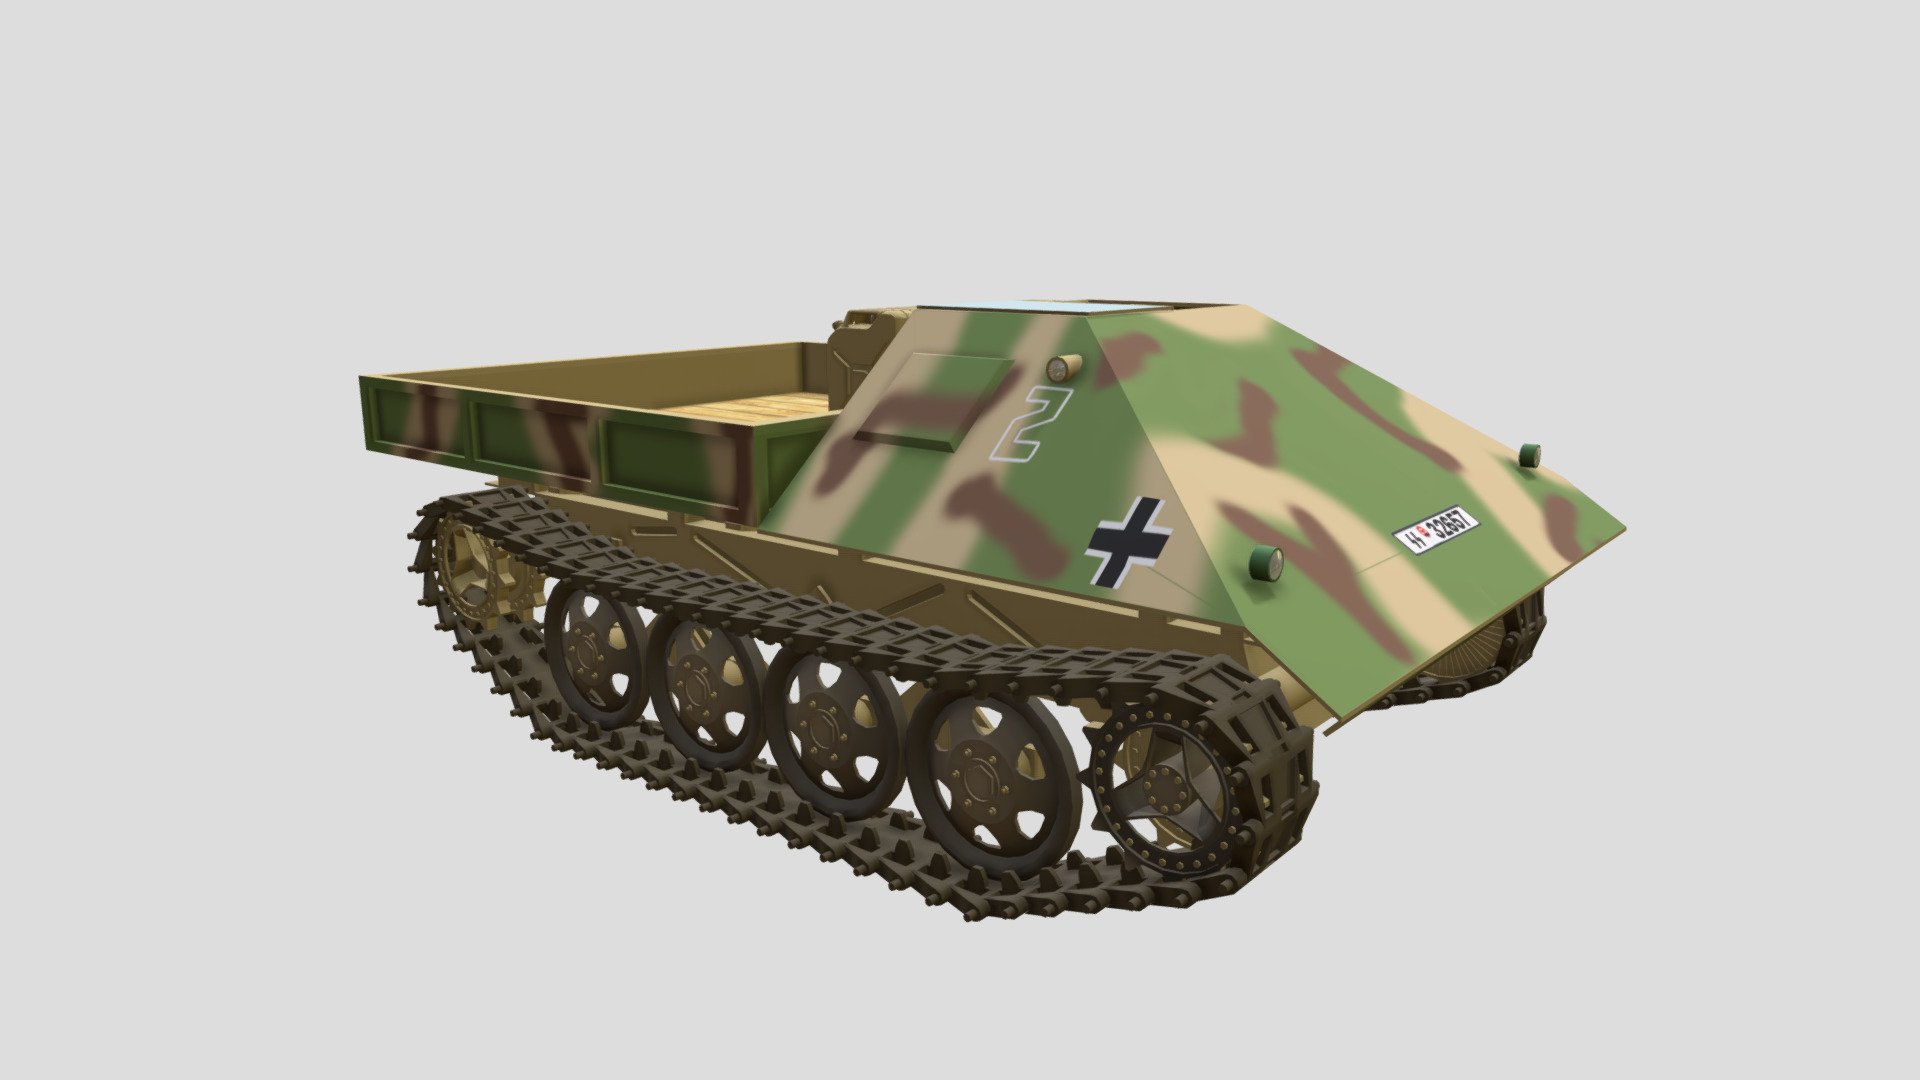 Raupenschlepper Ost (German: “Caterpillar Tractor East”, more commonly abbreviated to RSO) was a fully tracked, lightweight vehicle used by the Wehrmacht in World War II.
* The file is only for animation, cannot print the actual finished product.

二戰德國東線全地形載重牽引車，製作R.S.O.載重車的系列作之一。
沒有找到三視圖，只能用目測的，誤差將在所難免，請見諒！作品進行了輕量化減面，僅供動畫使用，無法以3D列印出實際的成品。 - Steyr Gepanzert RSO - Download Free 3D model by Basic Hsu (@Hsu.Pei.Ge) 3d model